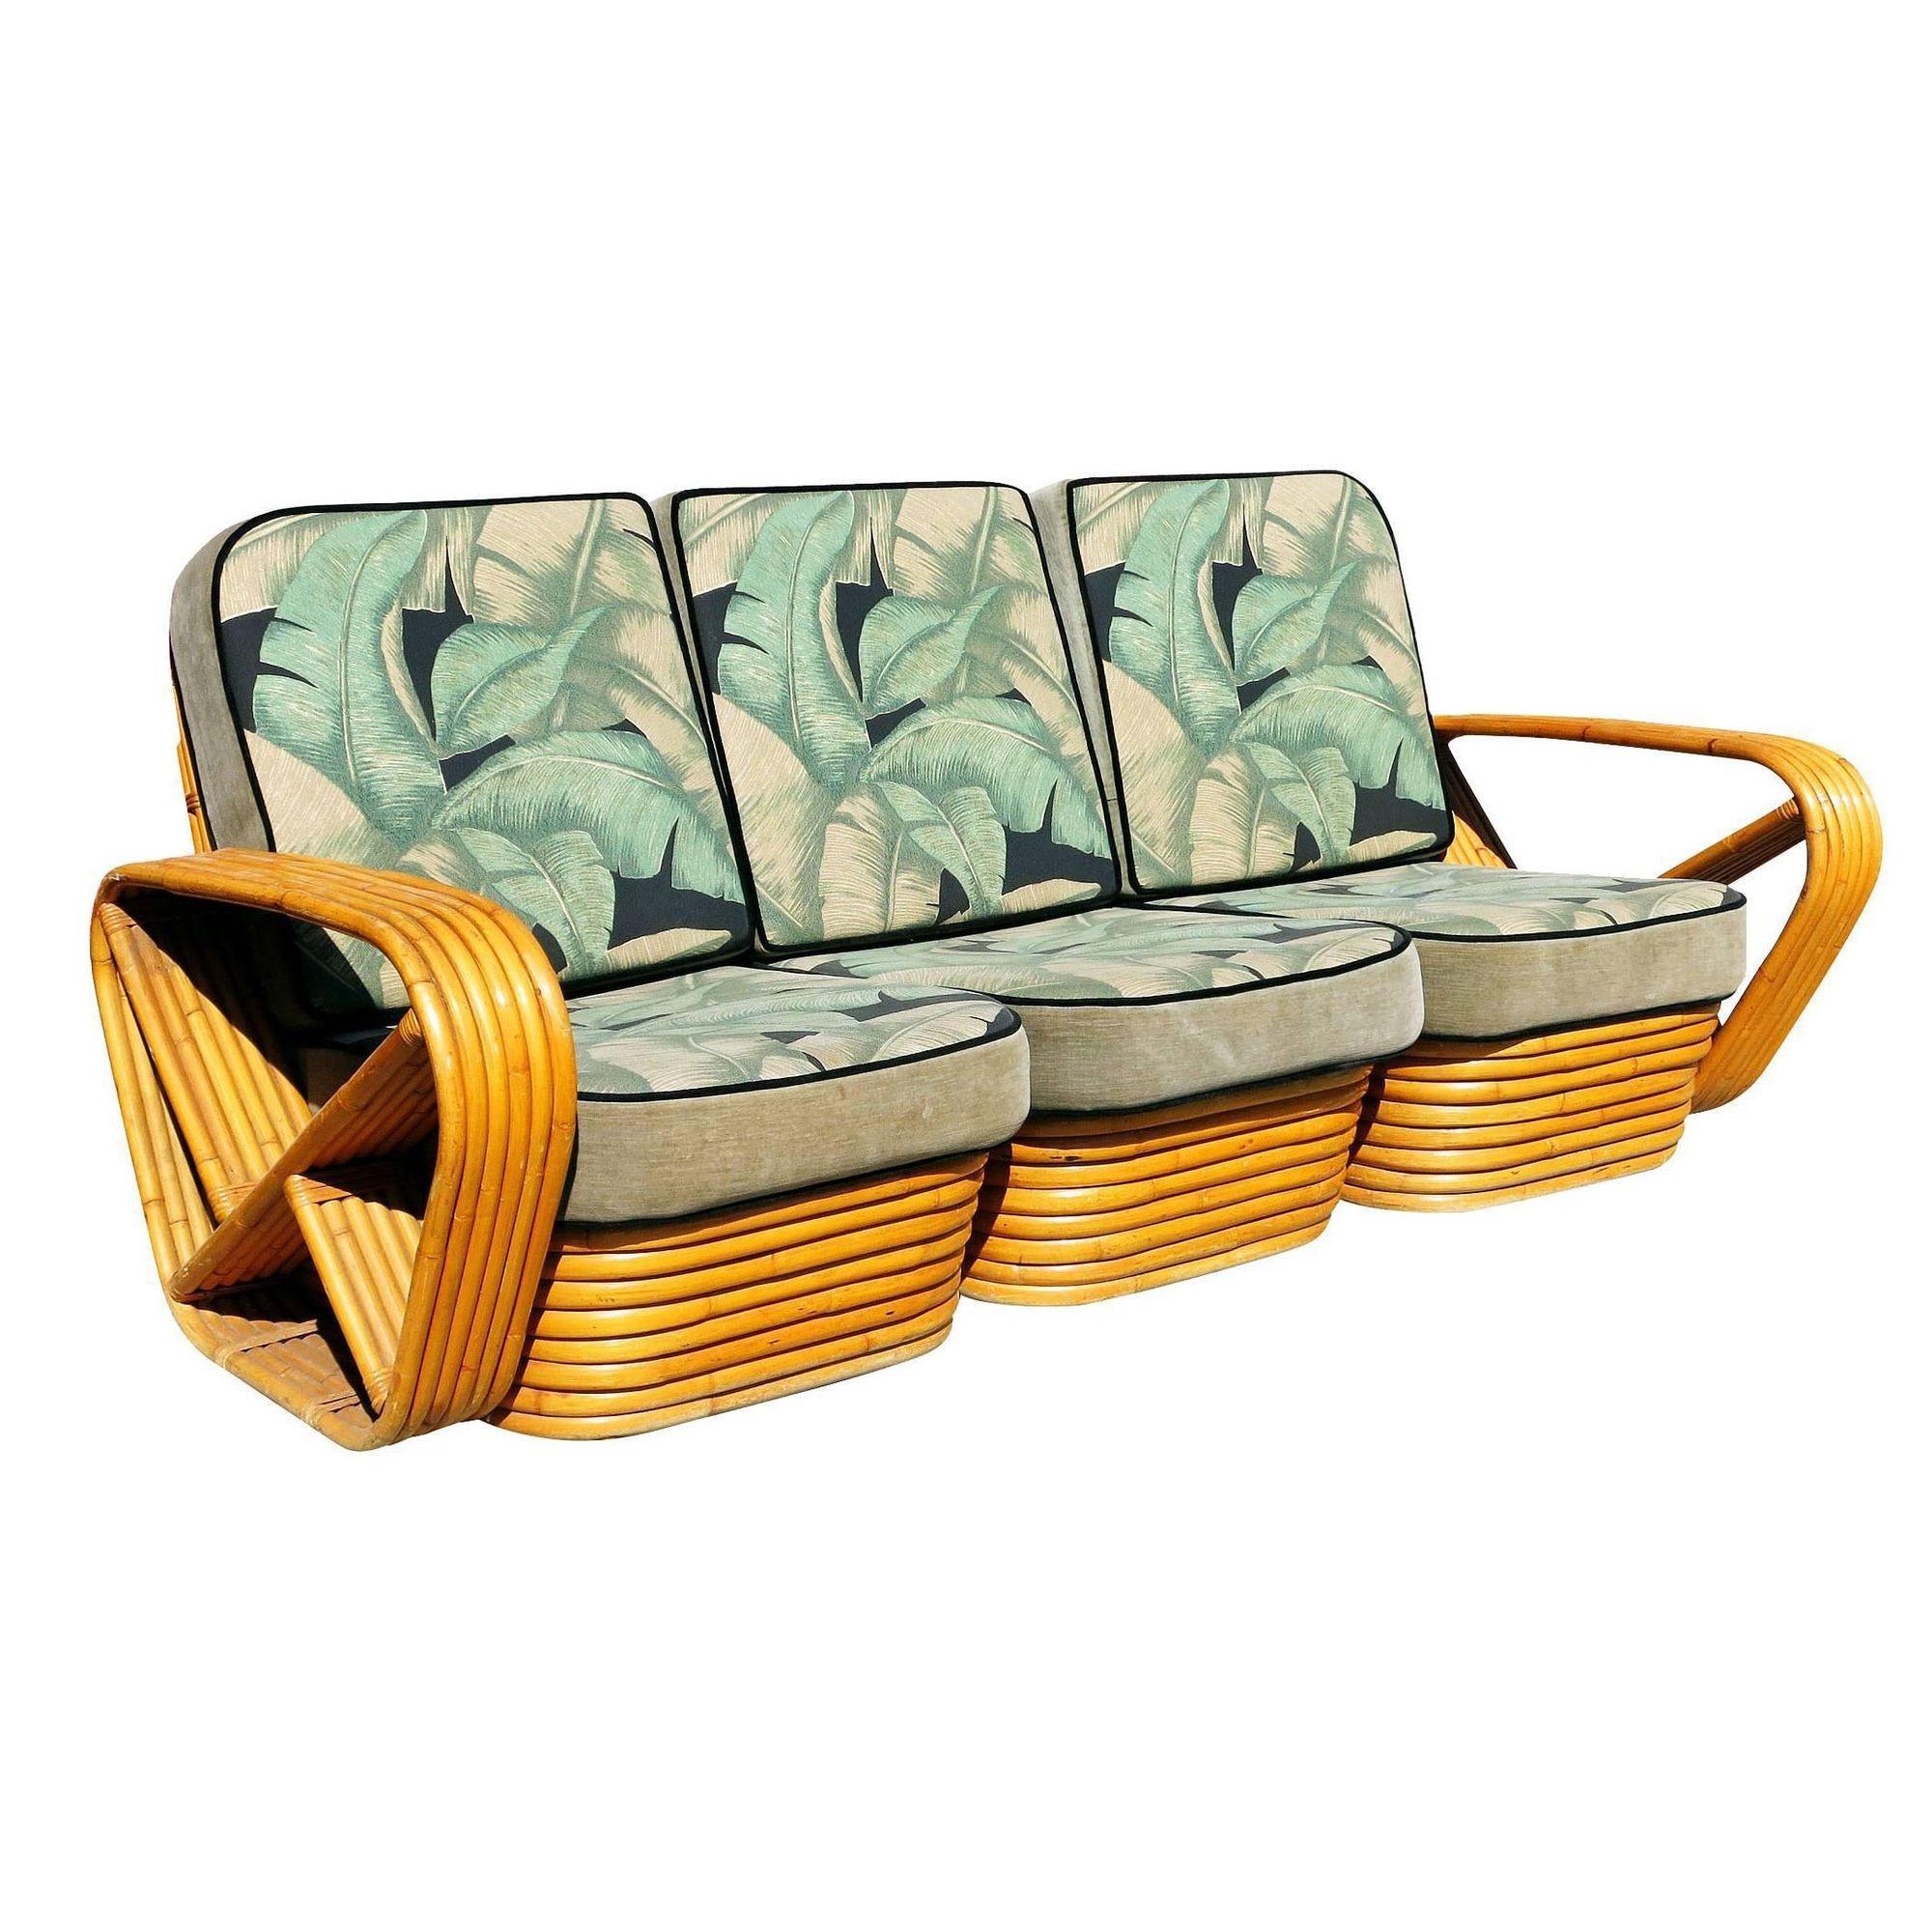 Six-strand square Pretzel style, three-seat sectional sofa. This sofa set of two features the famous six strand square pretzel side arms and stacked rattan base. The seats are covered in palm leaf patterned barkcloth cushions. 

Measures:
Sofa: